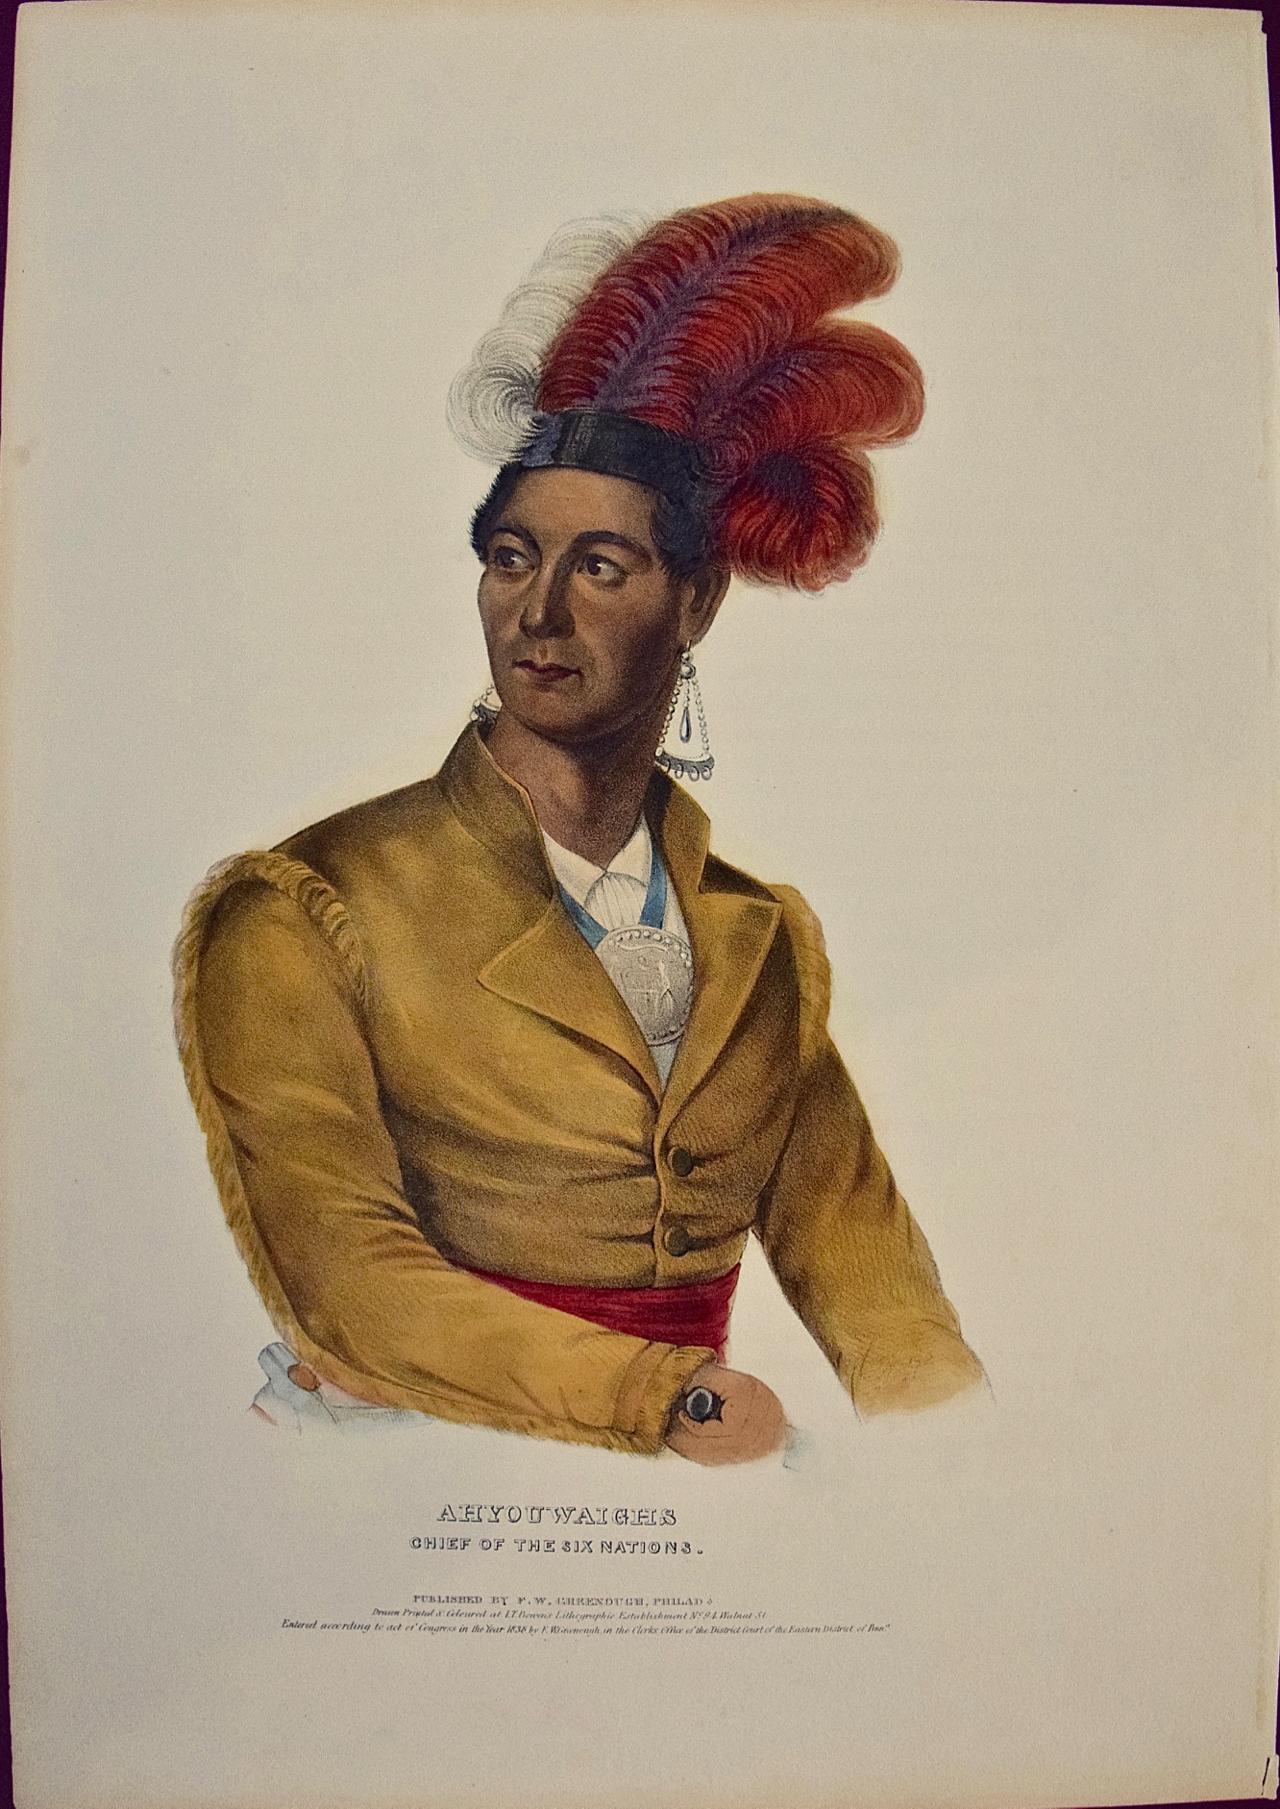 Ahyouwaighs, Chief of Six Nations: Hand-colored McKenney Folio-sized Lithograph